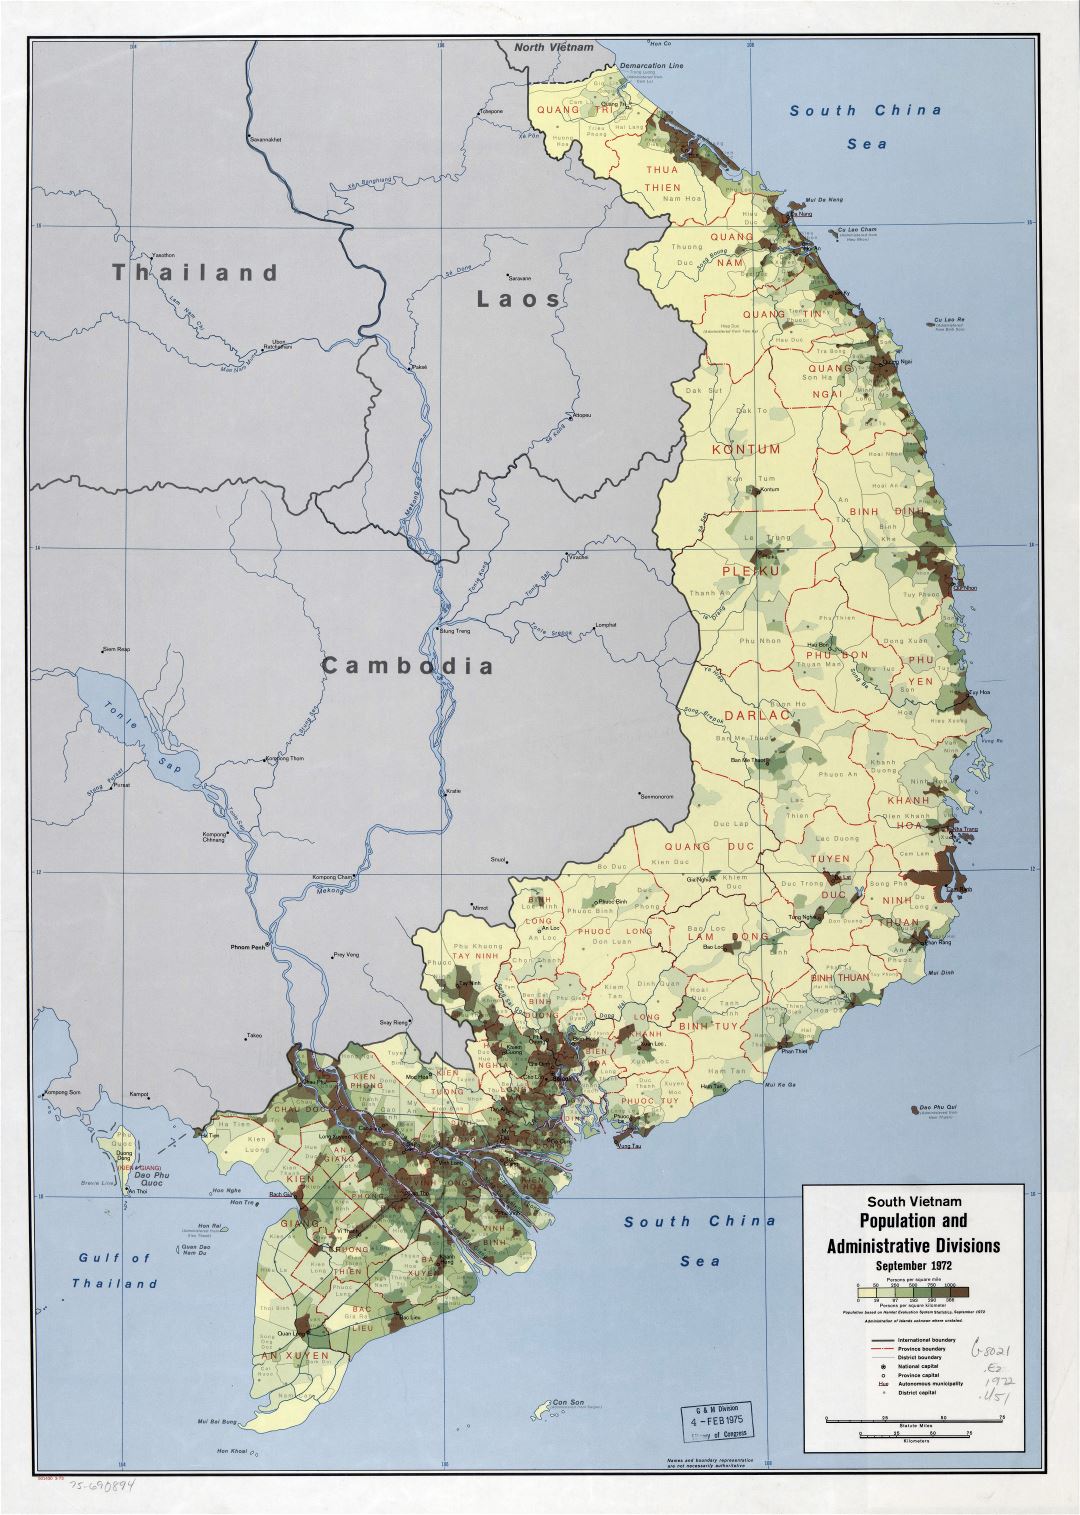 Large scale South Vietnam population and administrative divisions map - 1973